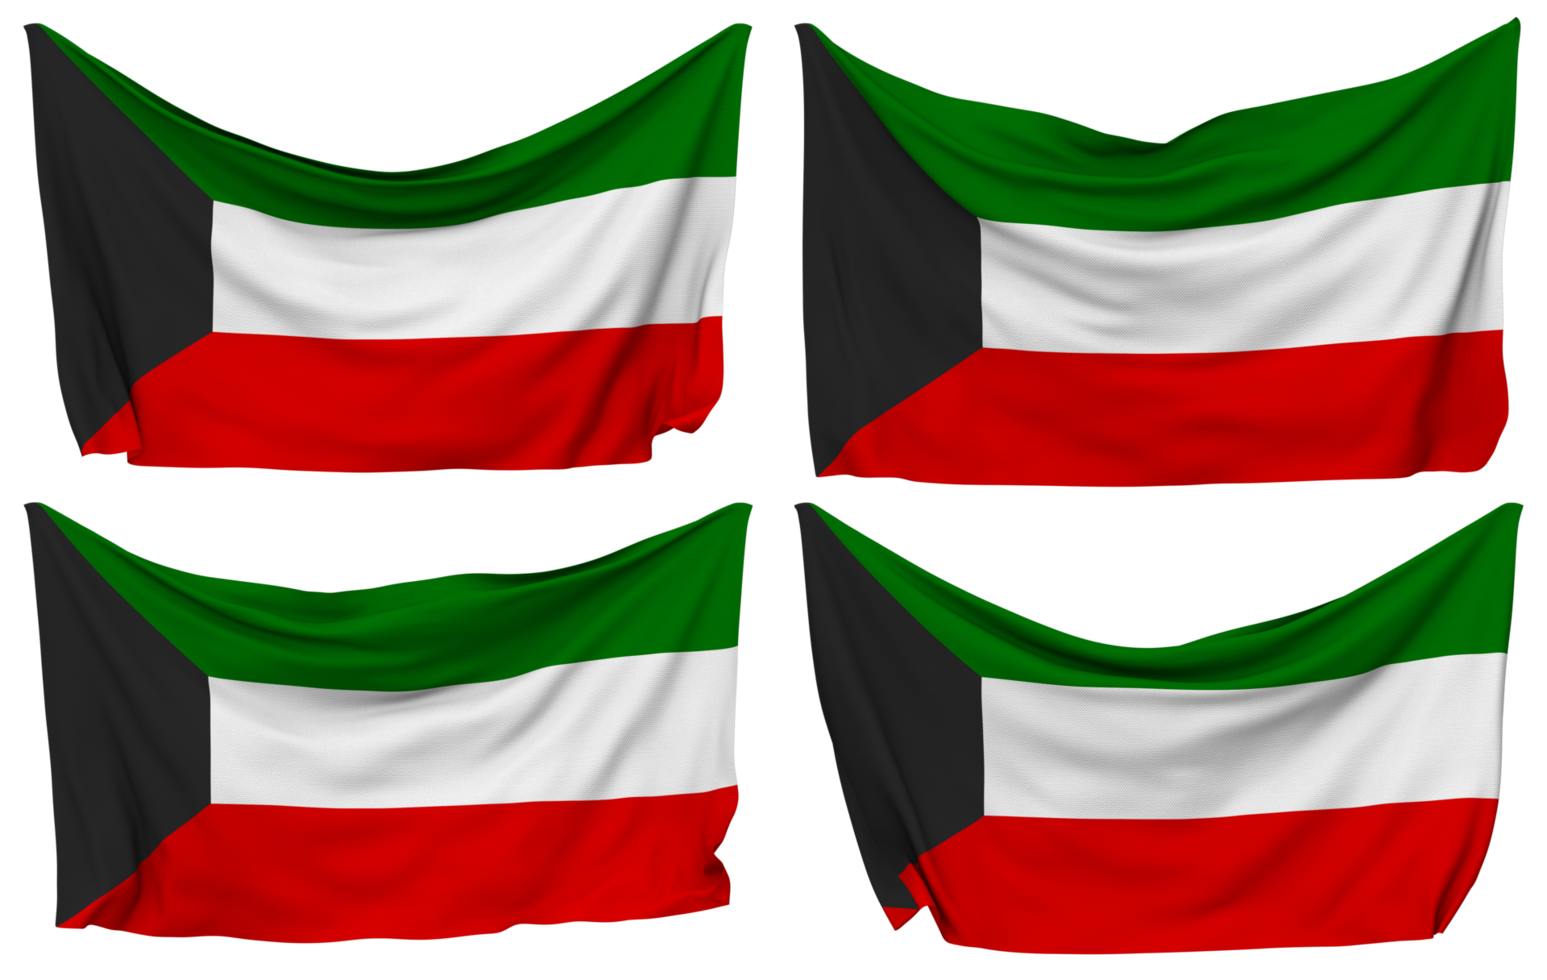 Kuwait Pinned Flag from Corners, Isolated with Different Waving Variations, 3D Rendering png